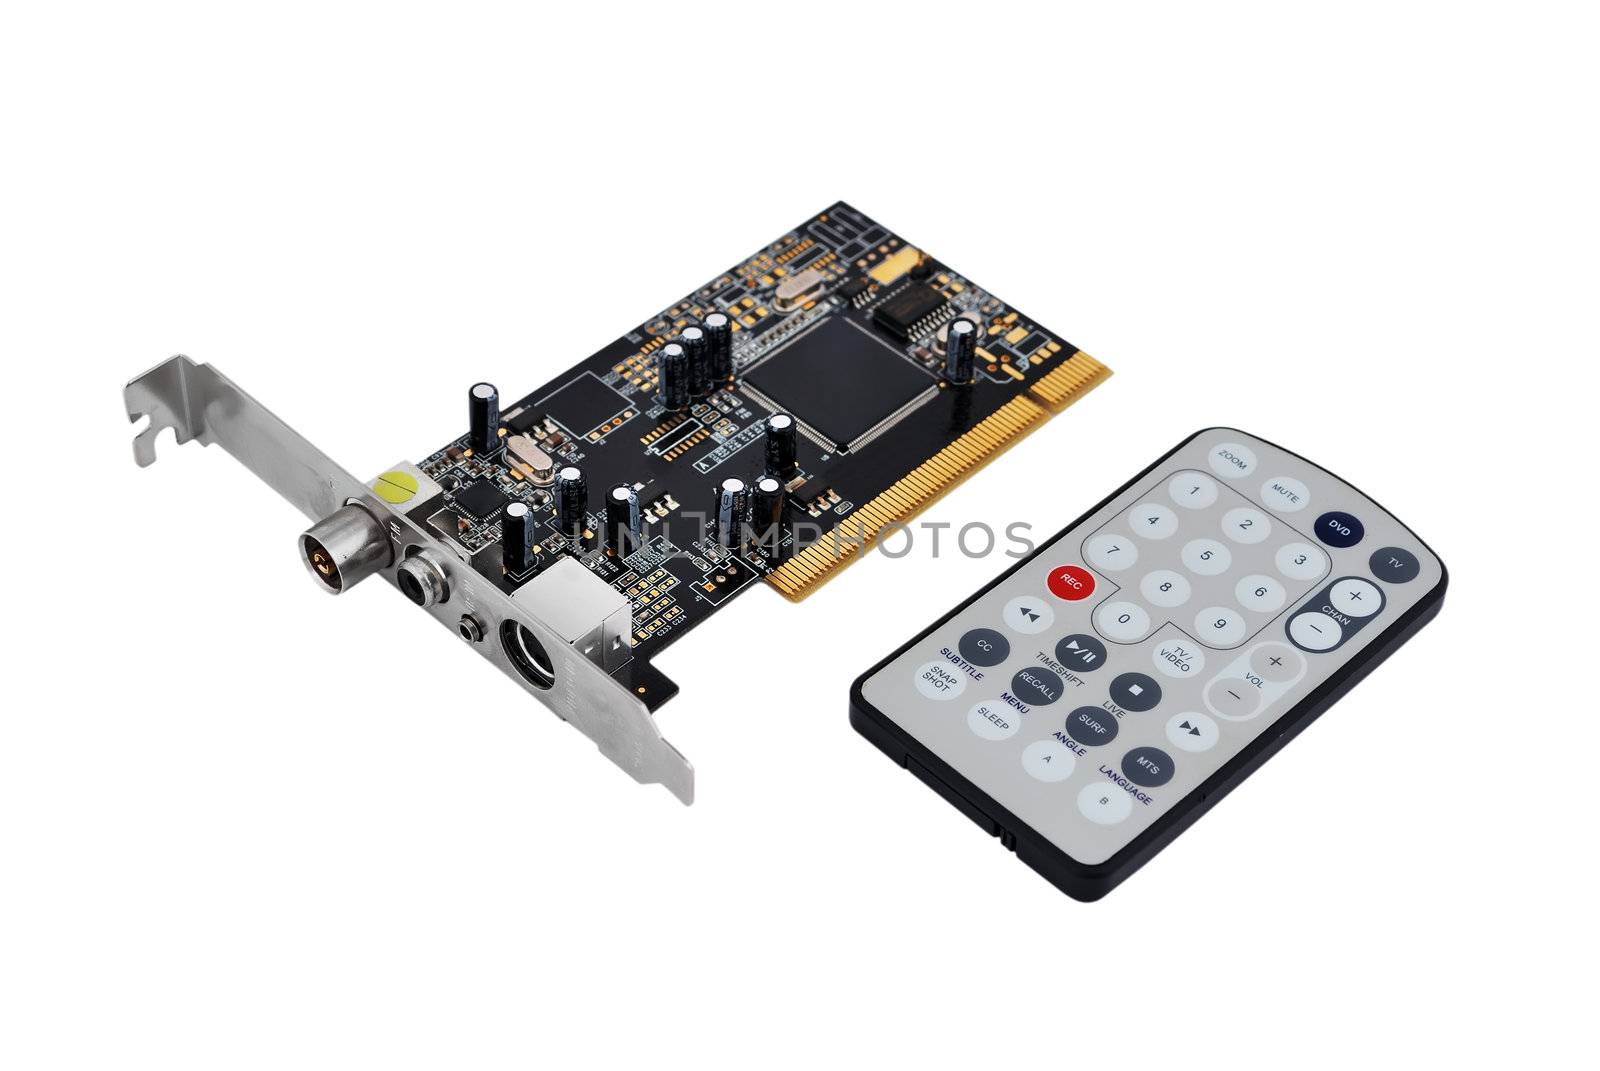 TV tuner card and remote control by vetkit